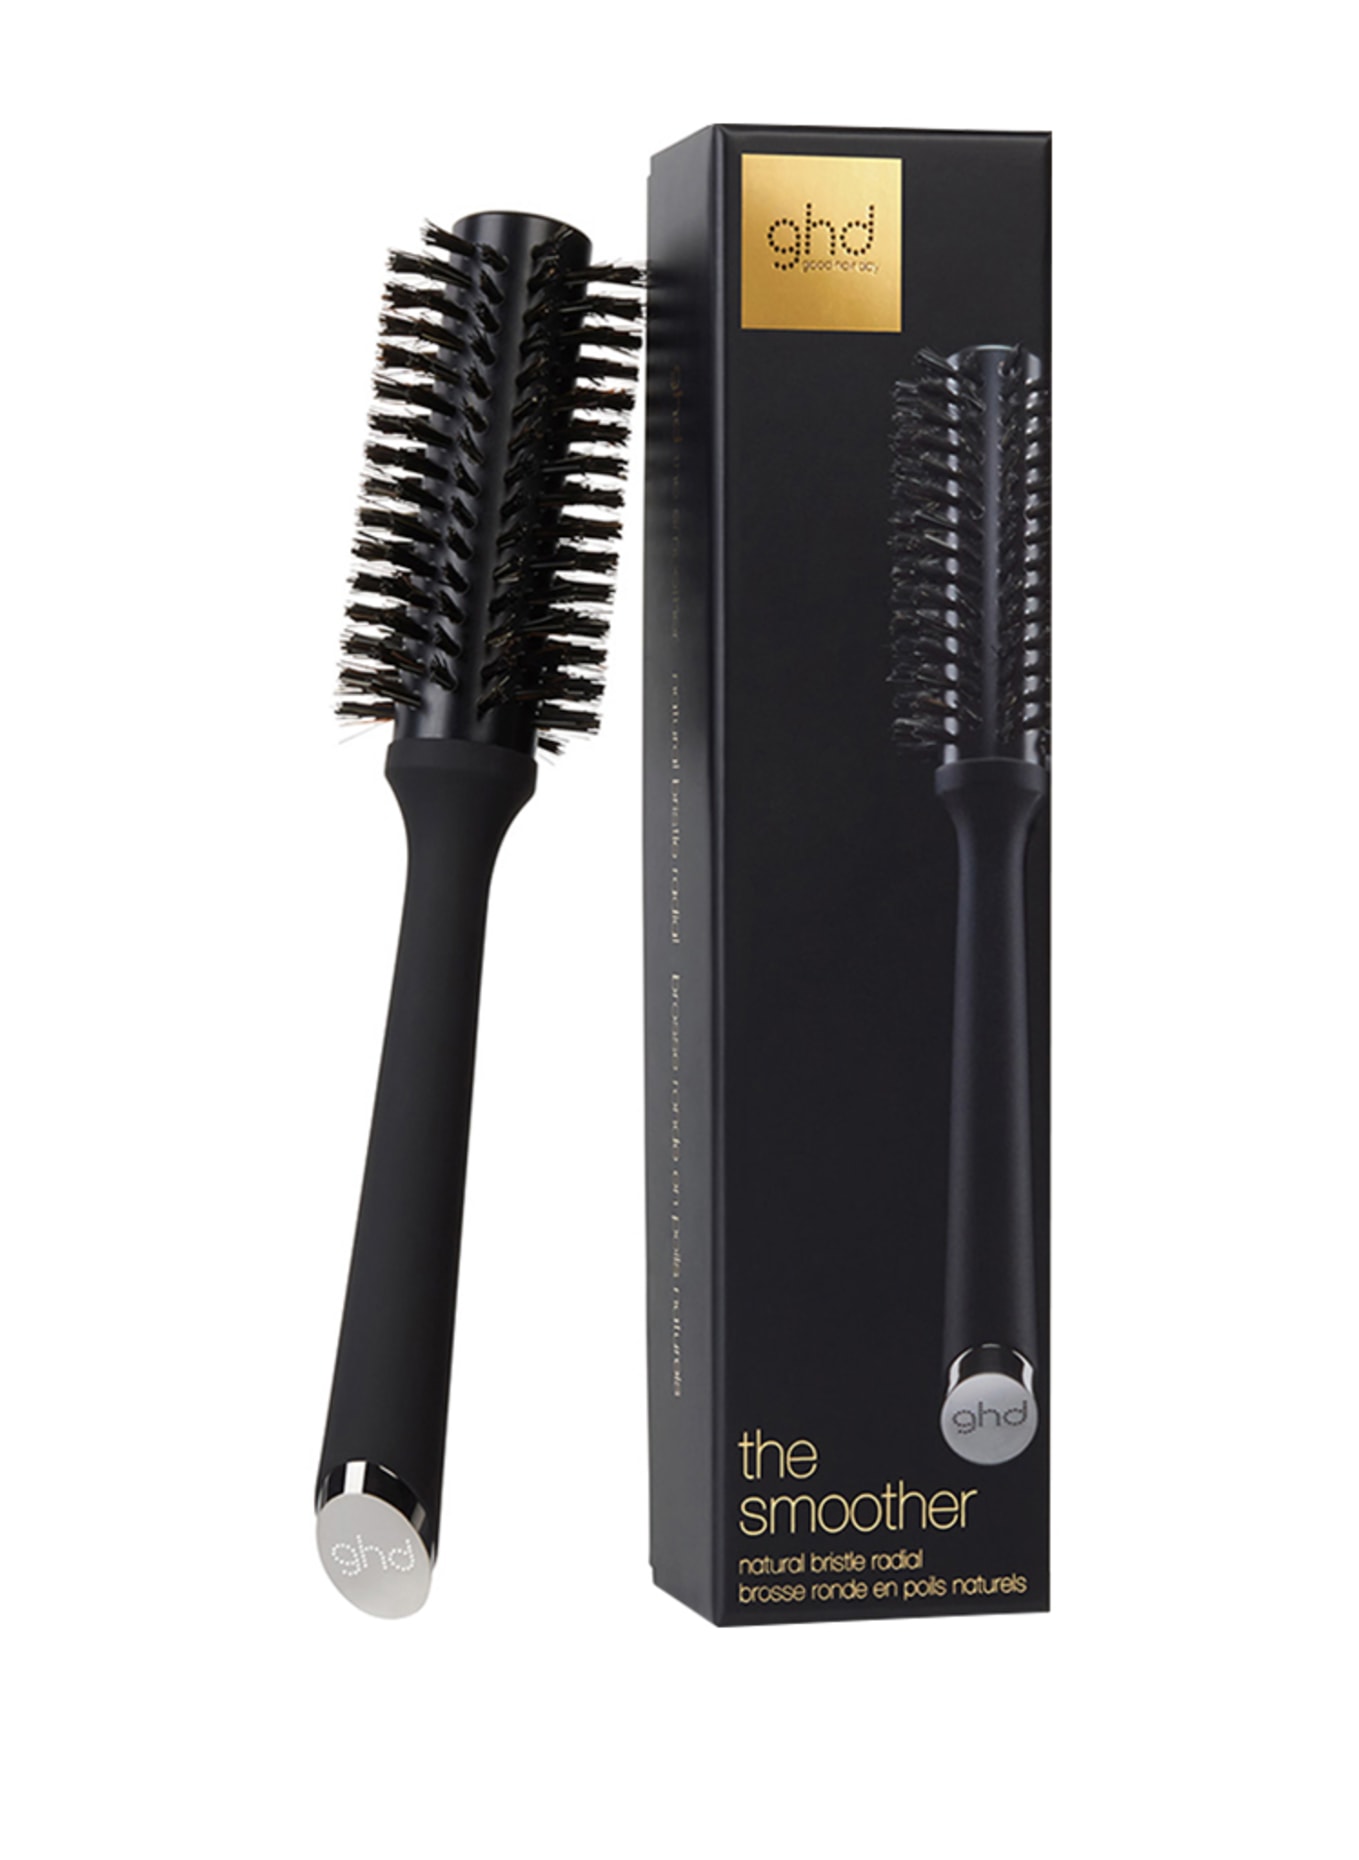 ghd THE SMOOTHER (SIZE 2) (Obrazek 2)